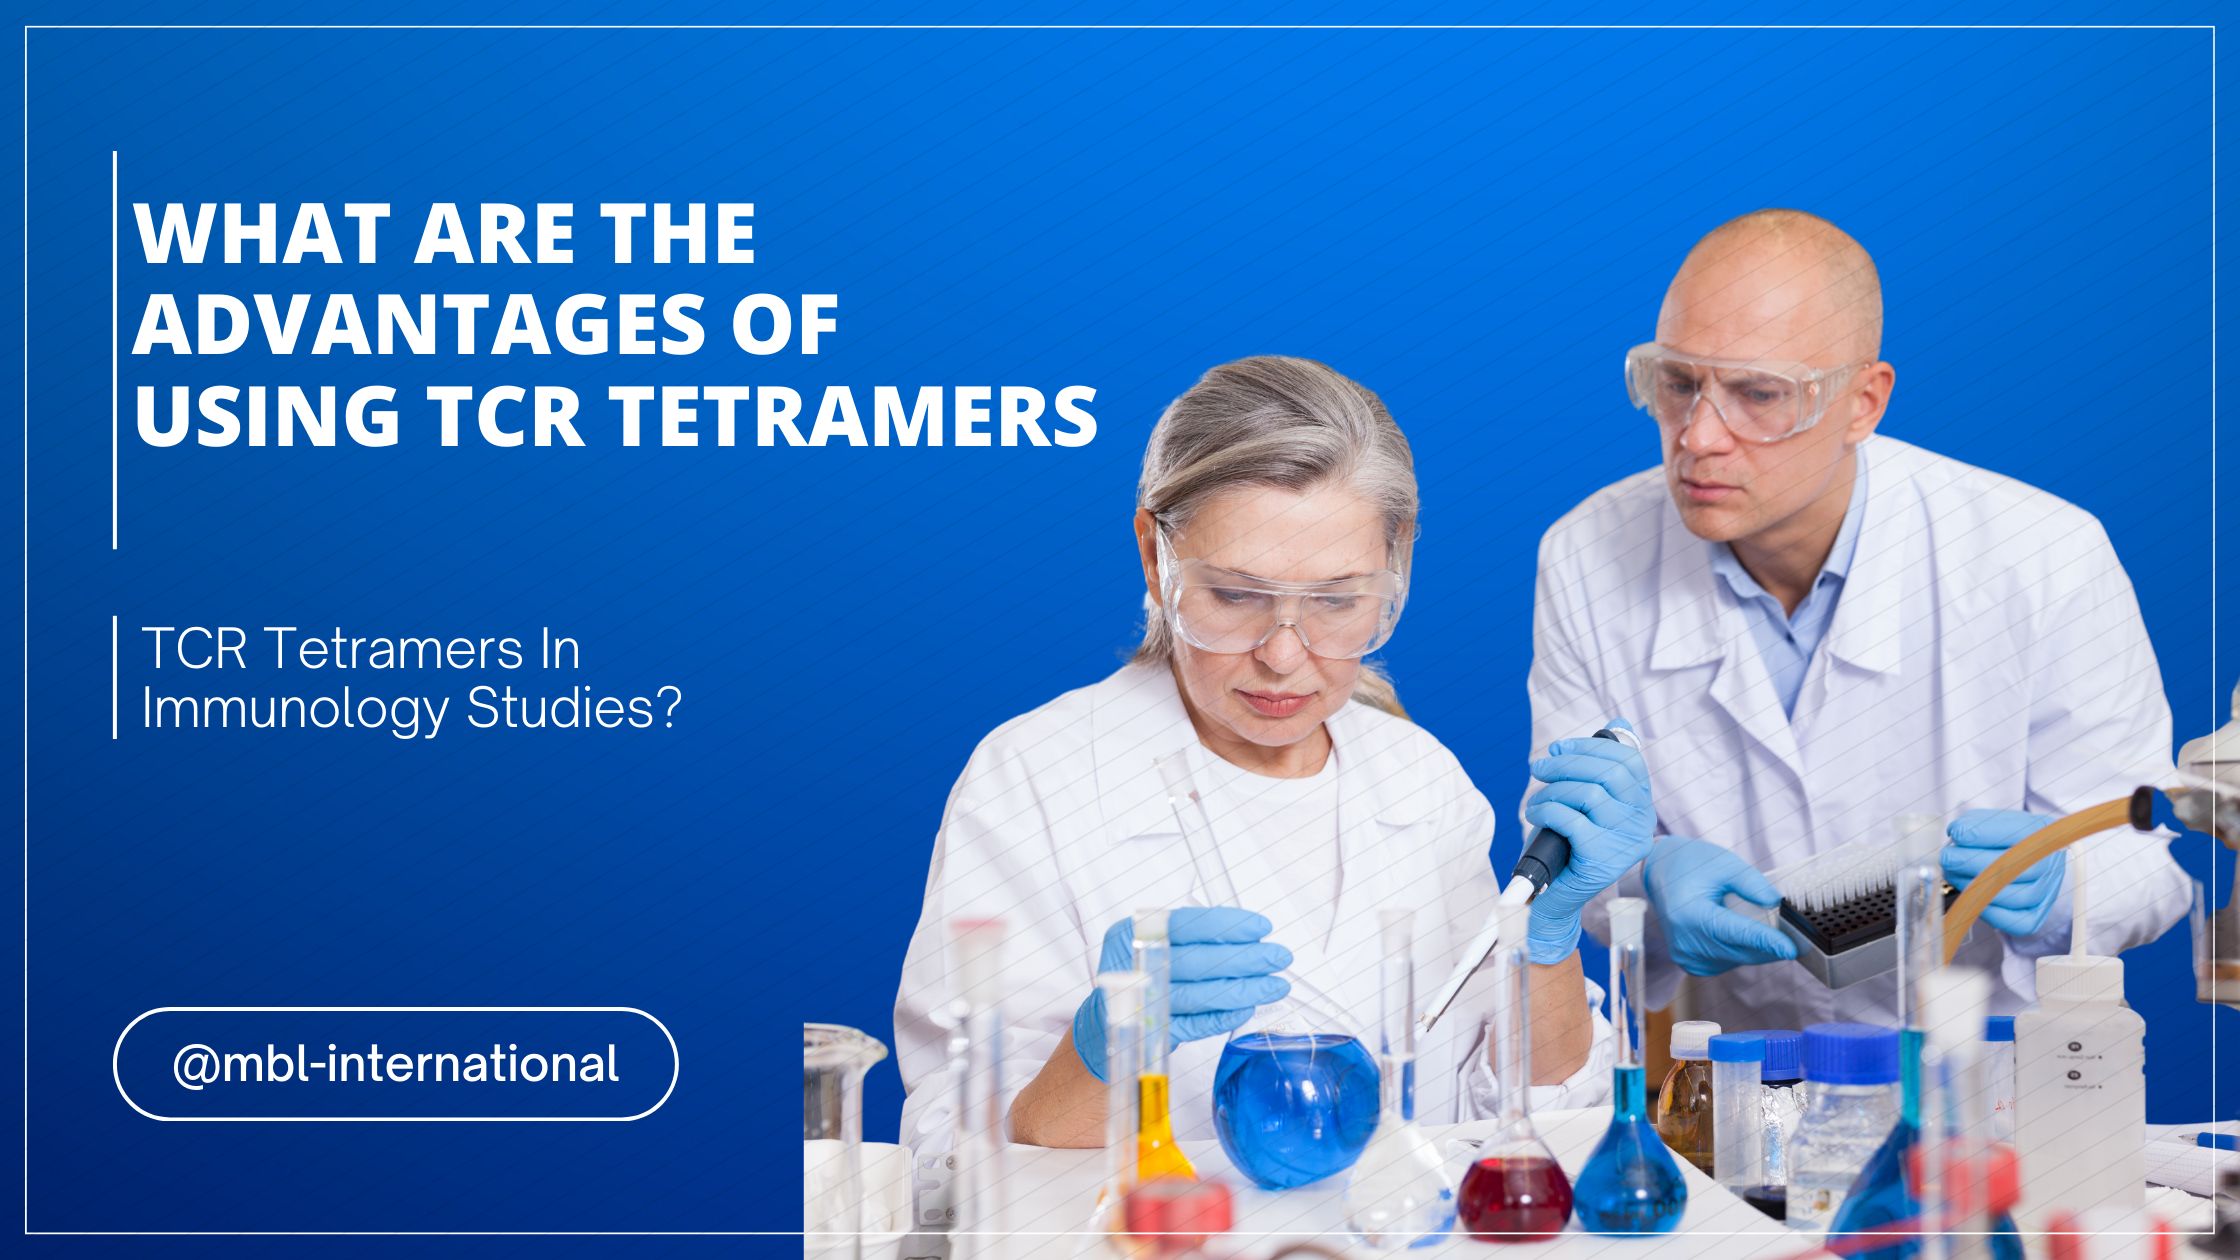 What Are The Advantages Of Using TCR Tetramers In Immunology Studies?